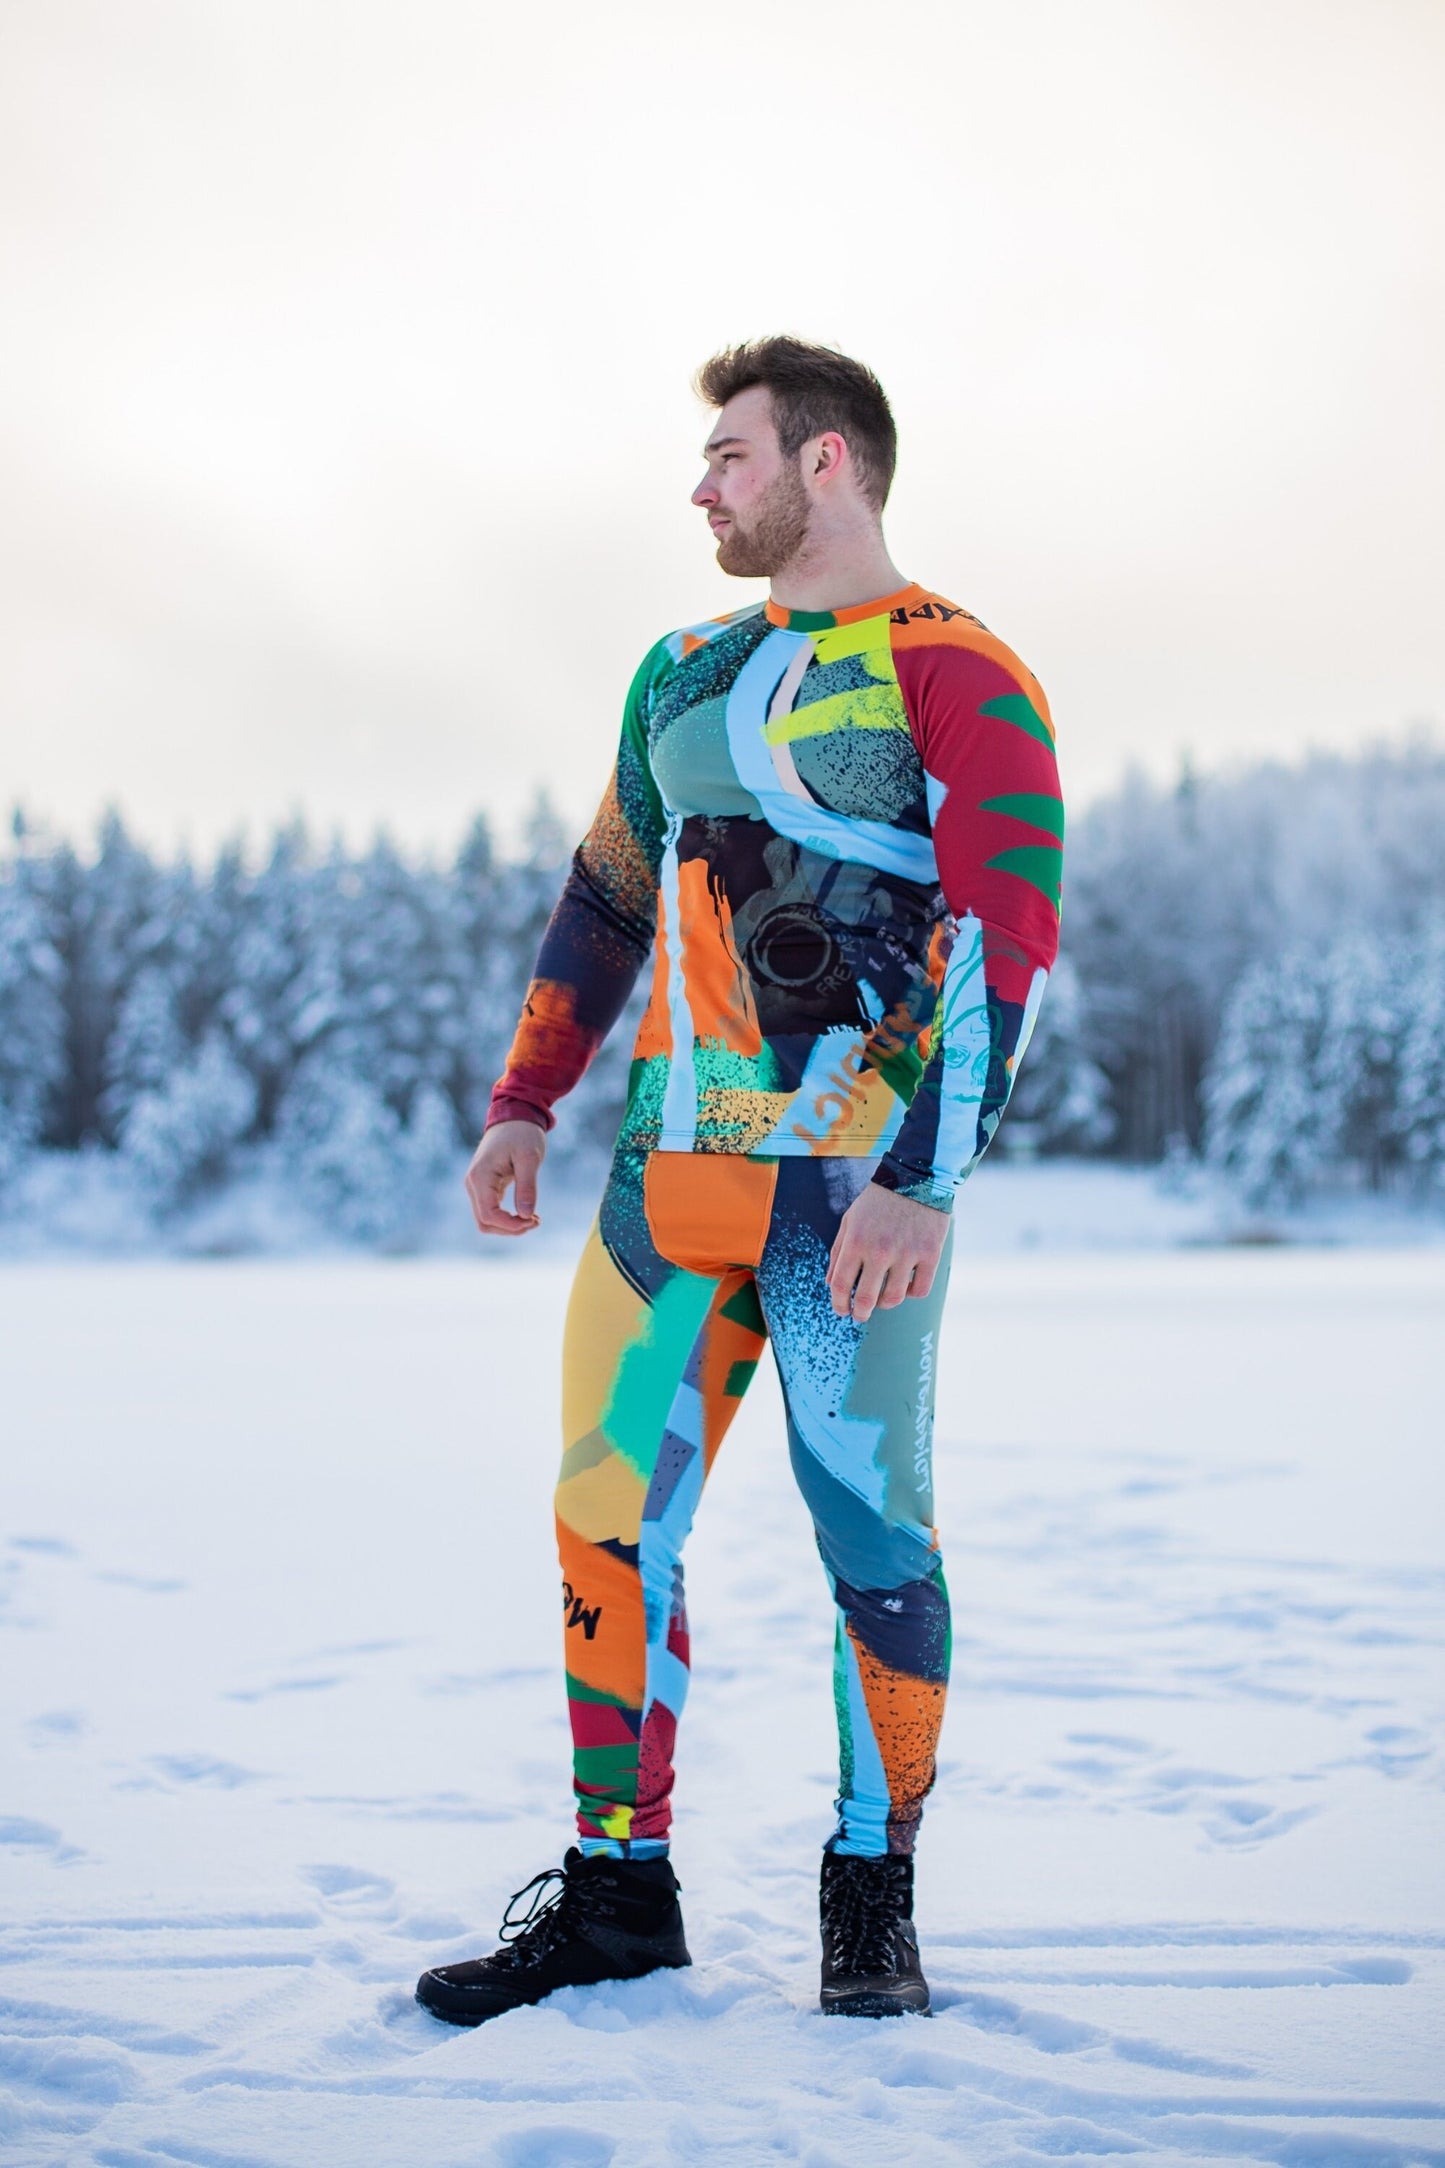 SET: Men's Orange Winter Thermal underwear, Montain's Clothes, Snowboard style, Man Leggings and Top, Men's Mountain's clothes, Man Leggings